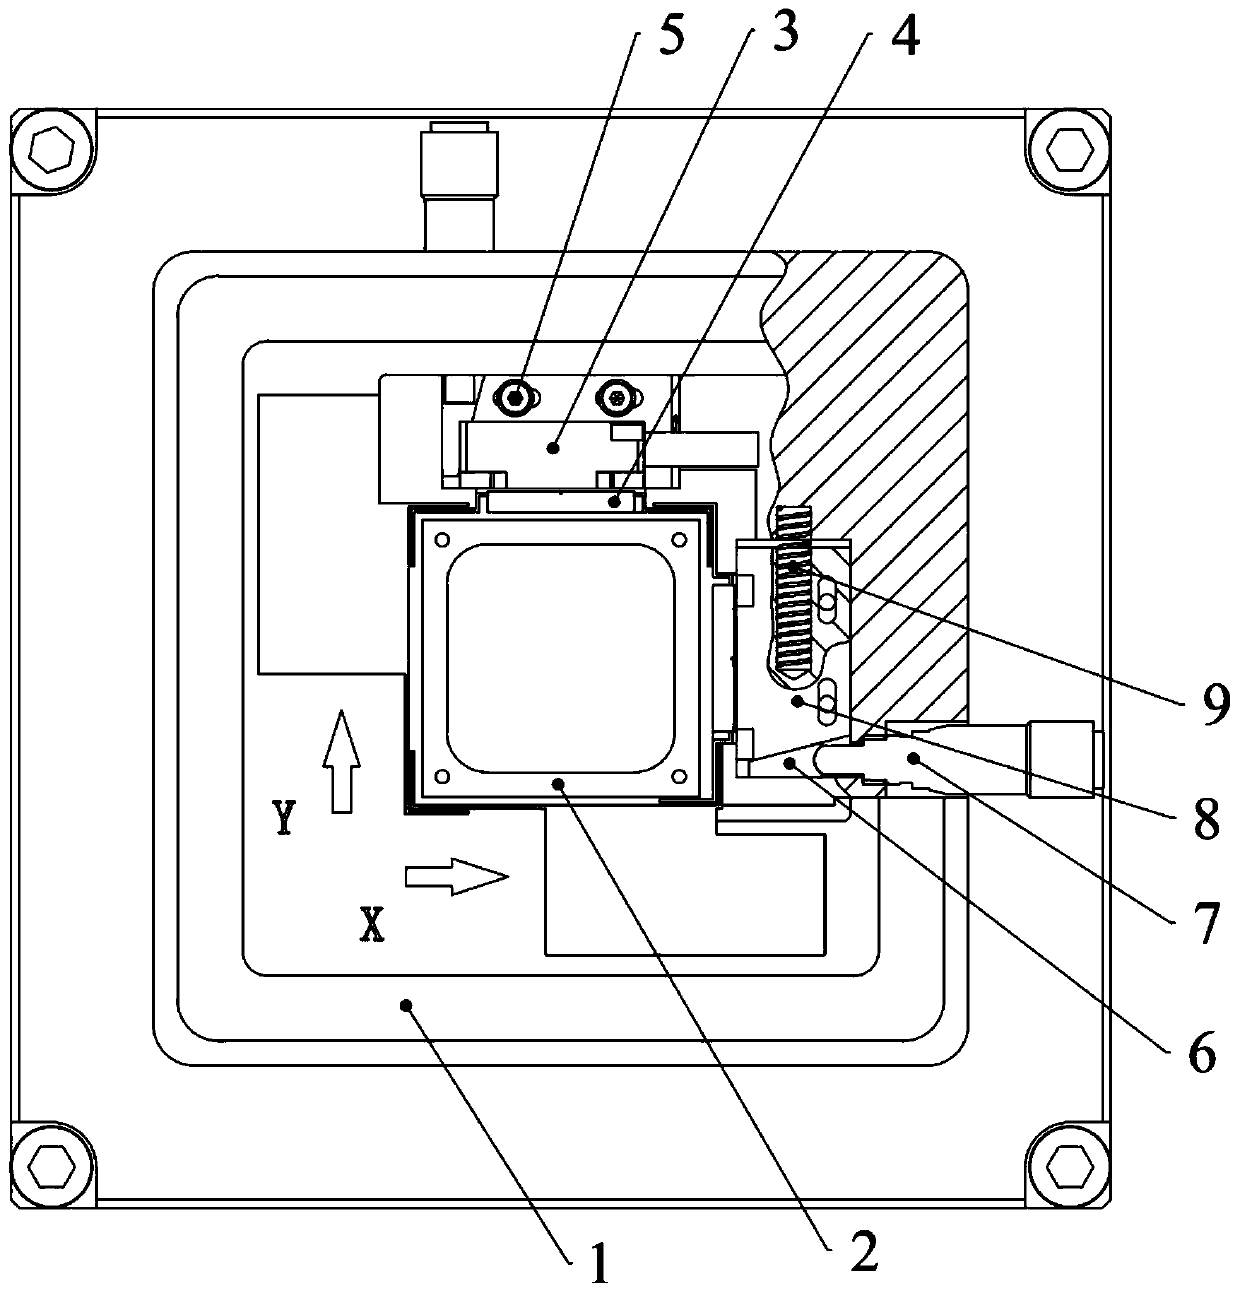 Zero-point fine-tuning device for grating-type micro-nano positioning platform